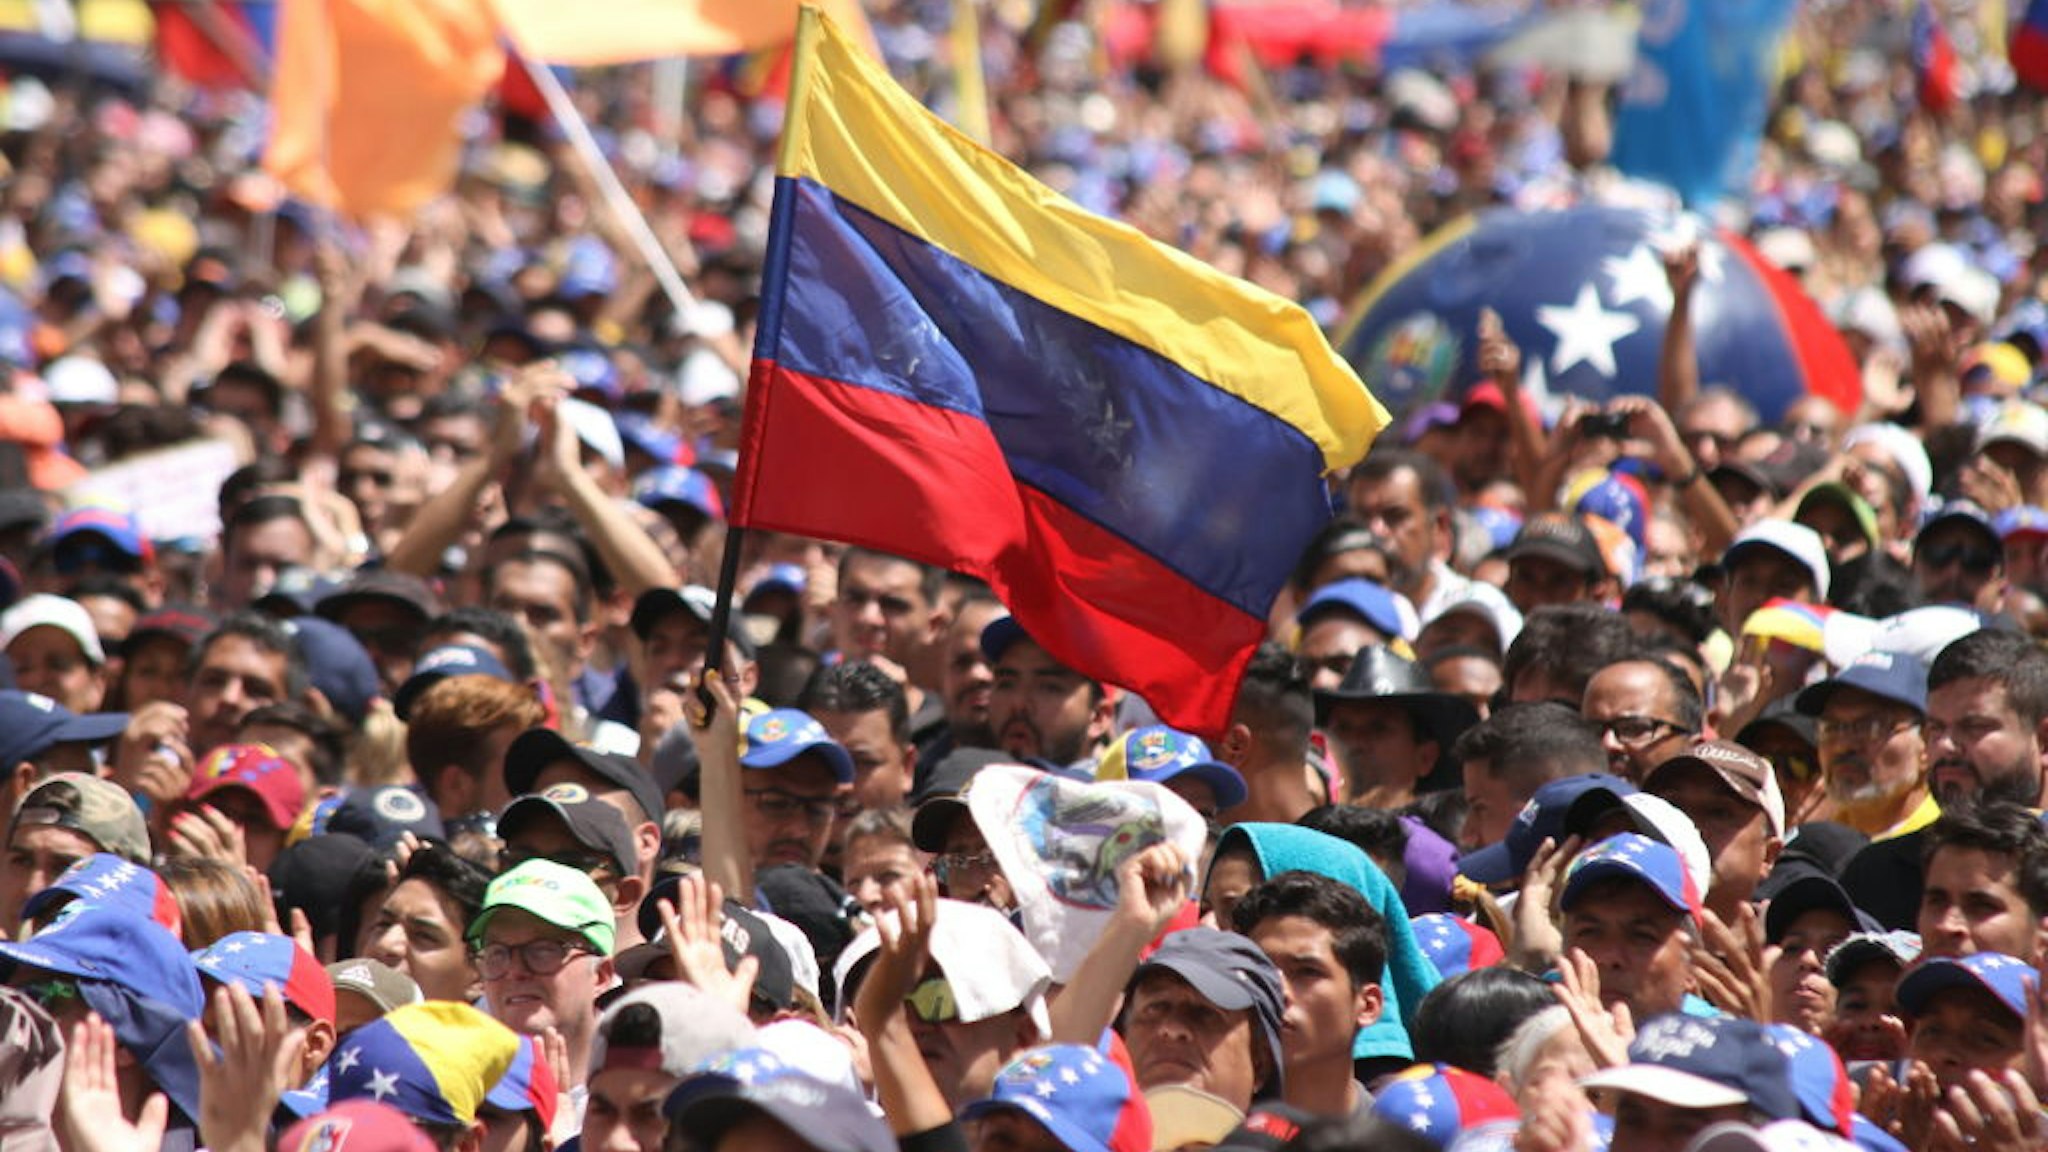 12 February 2019, Venezuela, Caracas: Numerous people take part in a rally of government opponents in the Venezuelan capital. Thousands of people took to the streets again in the power struggle between the Venezuelan head of state Maduro and the self-proclaimed interim president Guaido. On the occasion of Youth Day, they called on the armed forces to open the borders and enable the delivery of relief supplies to the suffering population.